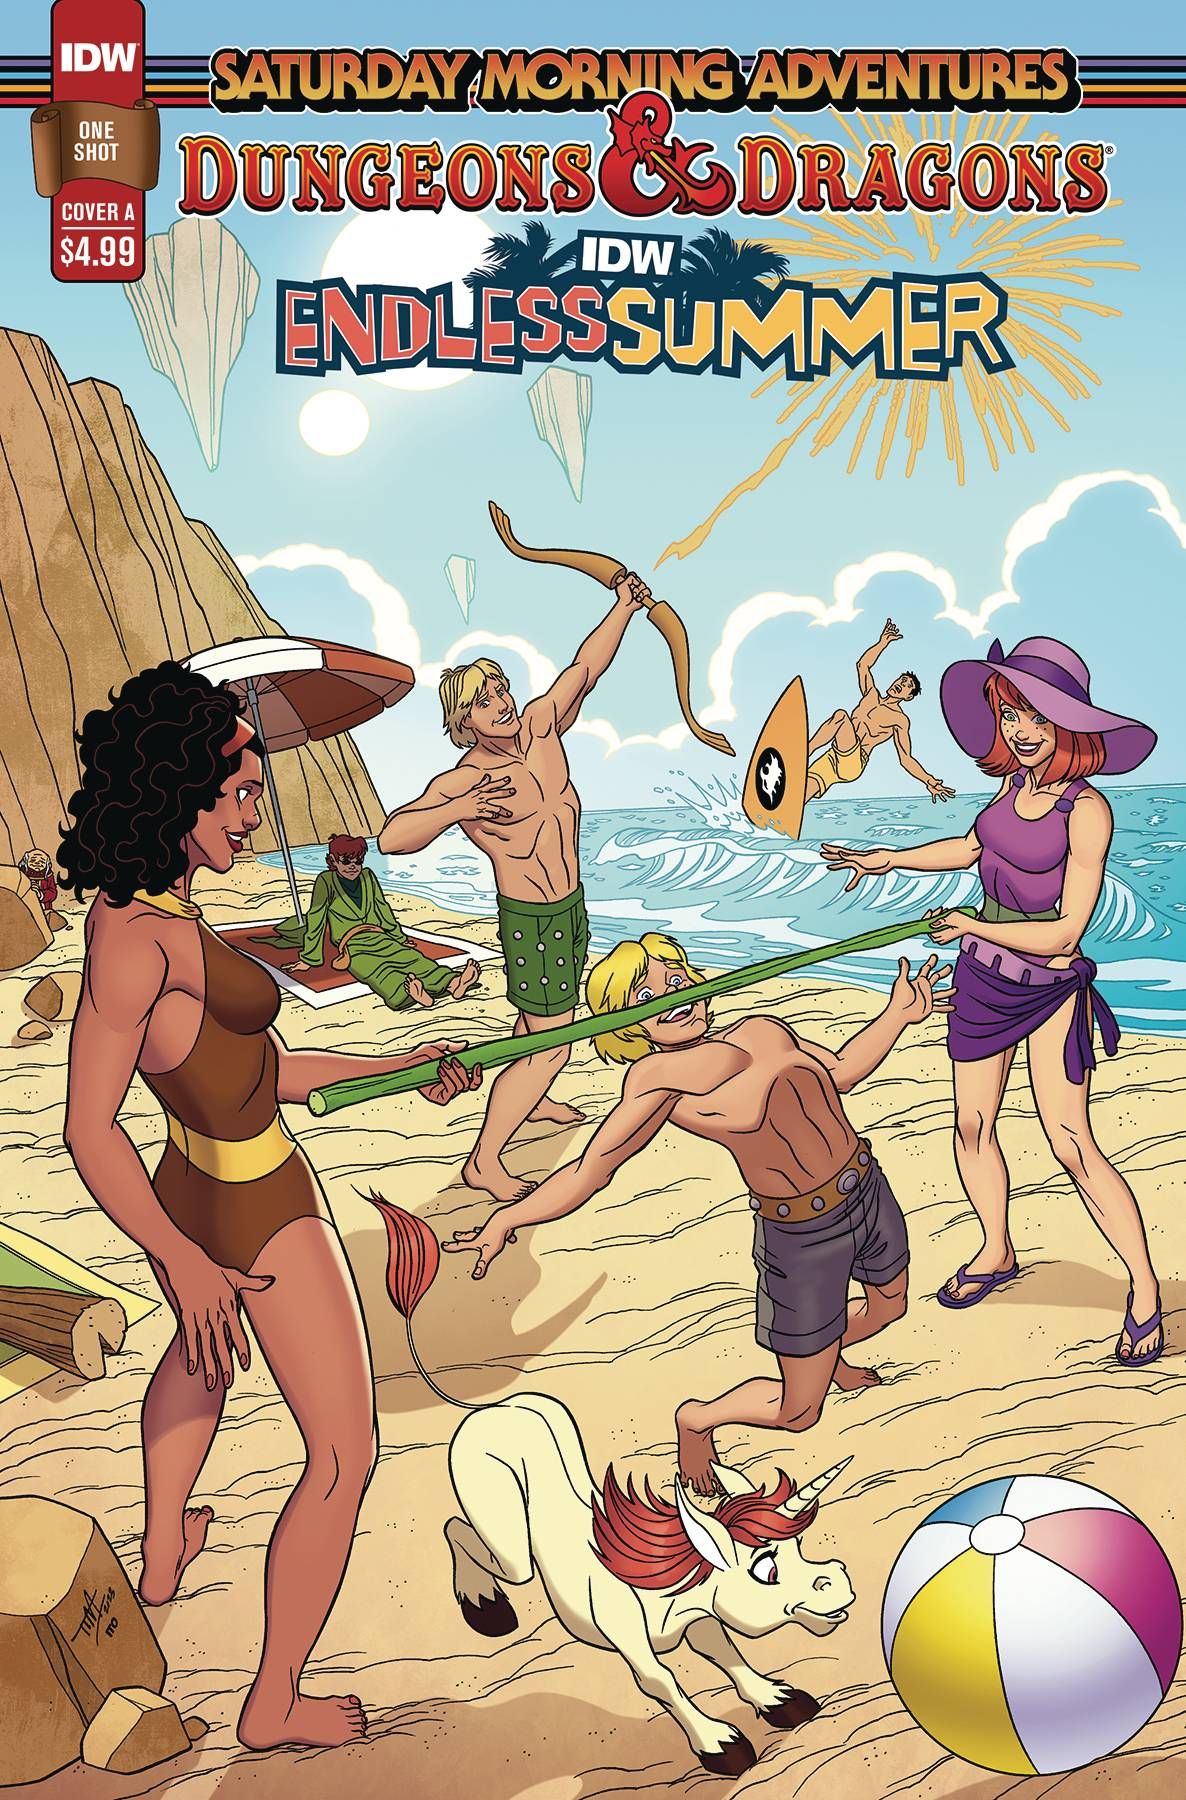 IDW Endless Summer Dungeons & Dragons: Saturday Morning Adventures #nn Comic